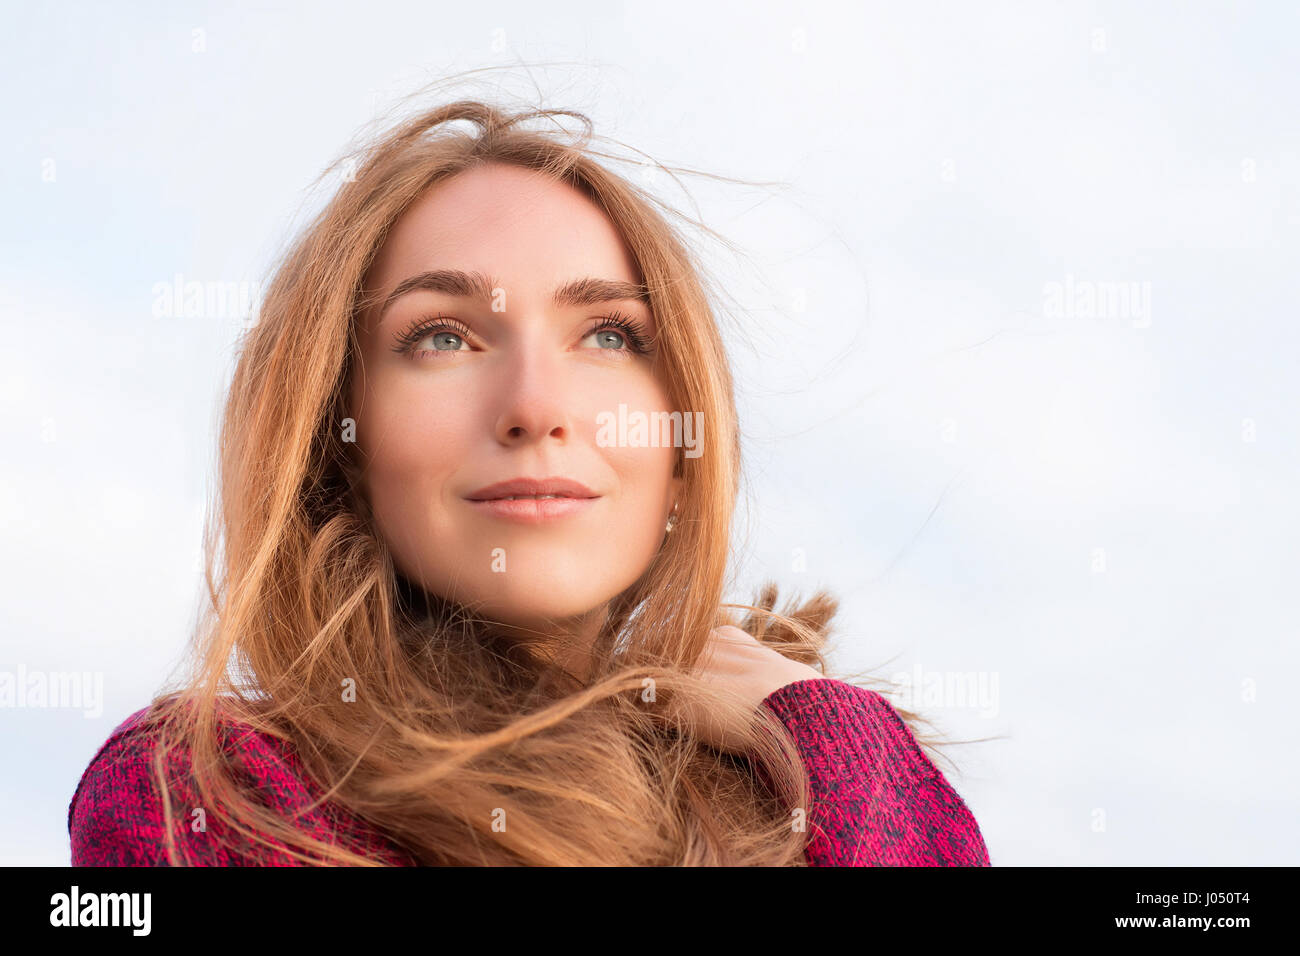 Serene beautiful woman with long hair fluttering in the wind. Outdoor portrait. Looking up at the distance, low point view Stock Photo